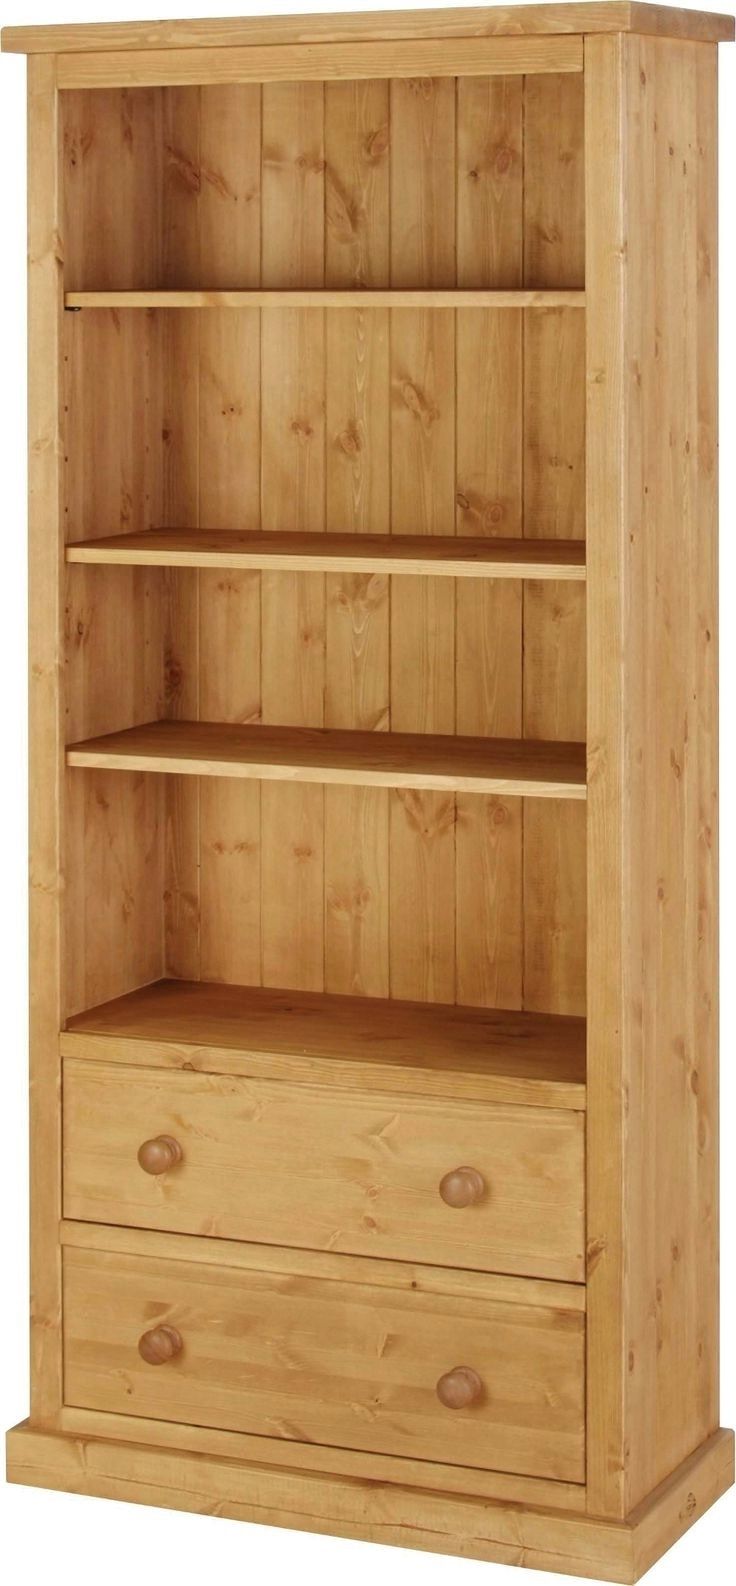 Newest Bookcases With Drawers On Bottom With Regard To Bookshelf With Drawers On Bottom • Drawer Ideas (View 12 of 15)